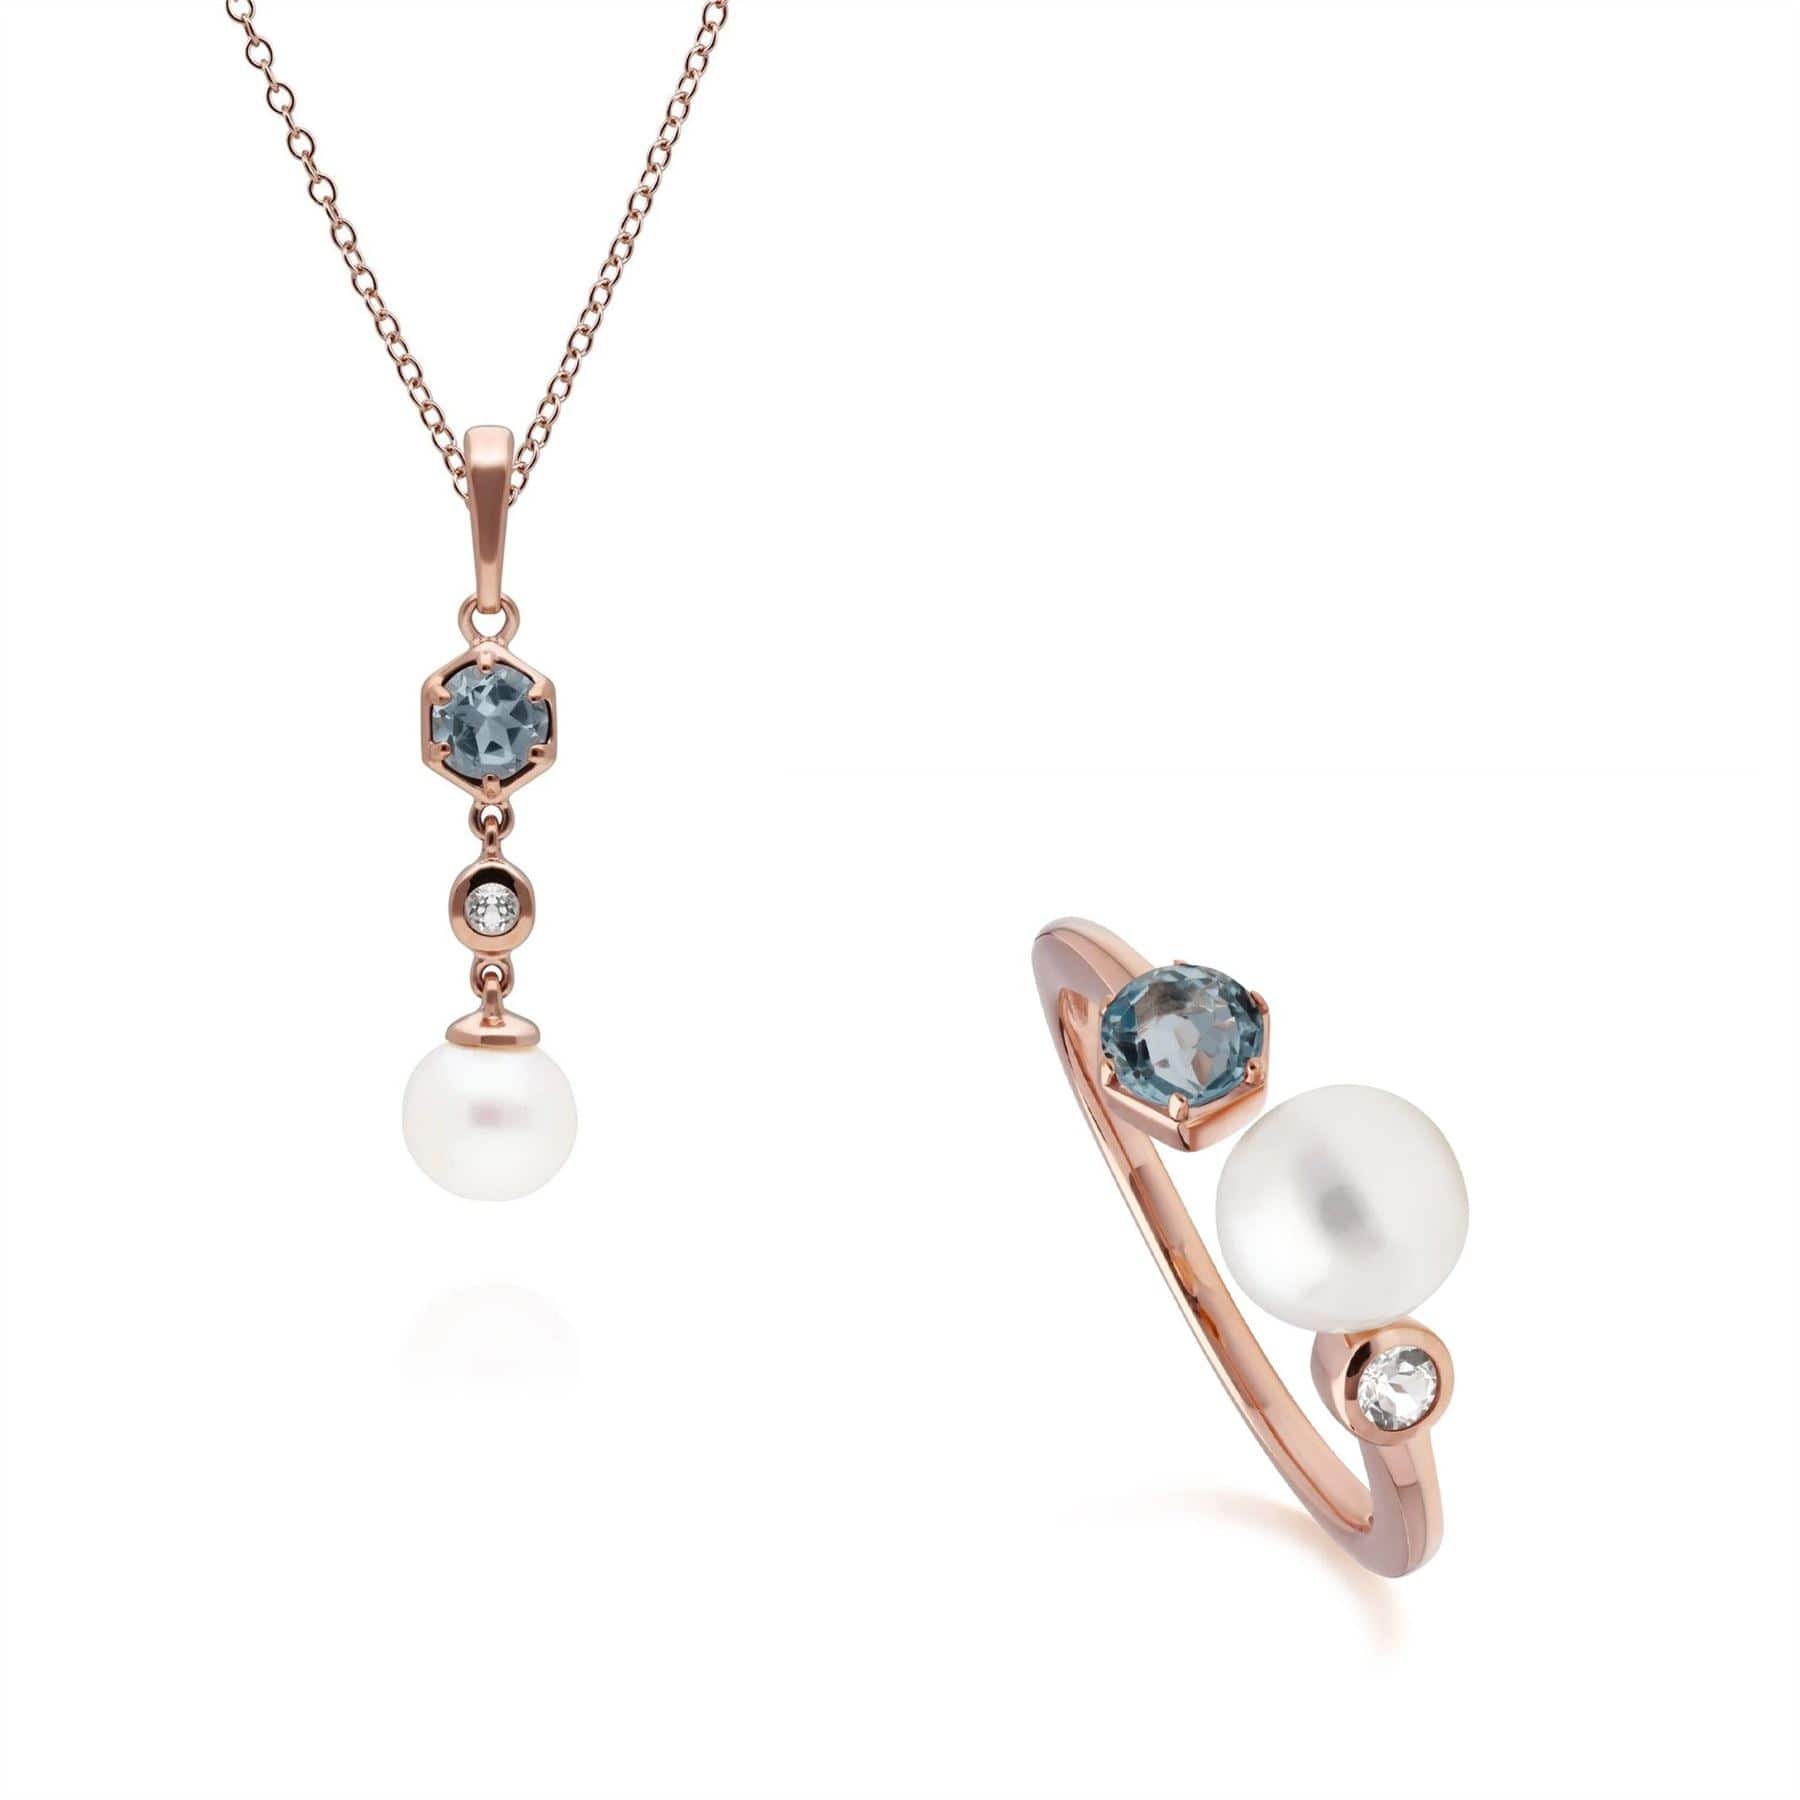 270P030310925-270R058810925 Modern Pearl & Topaz Pendant & Ring Set in Rose Gold Plated Sterling Silver 1